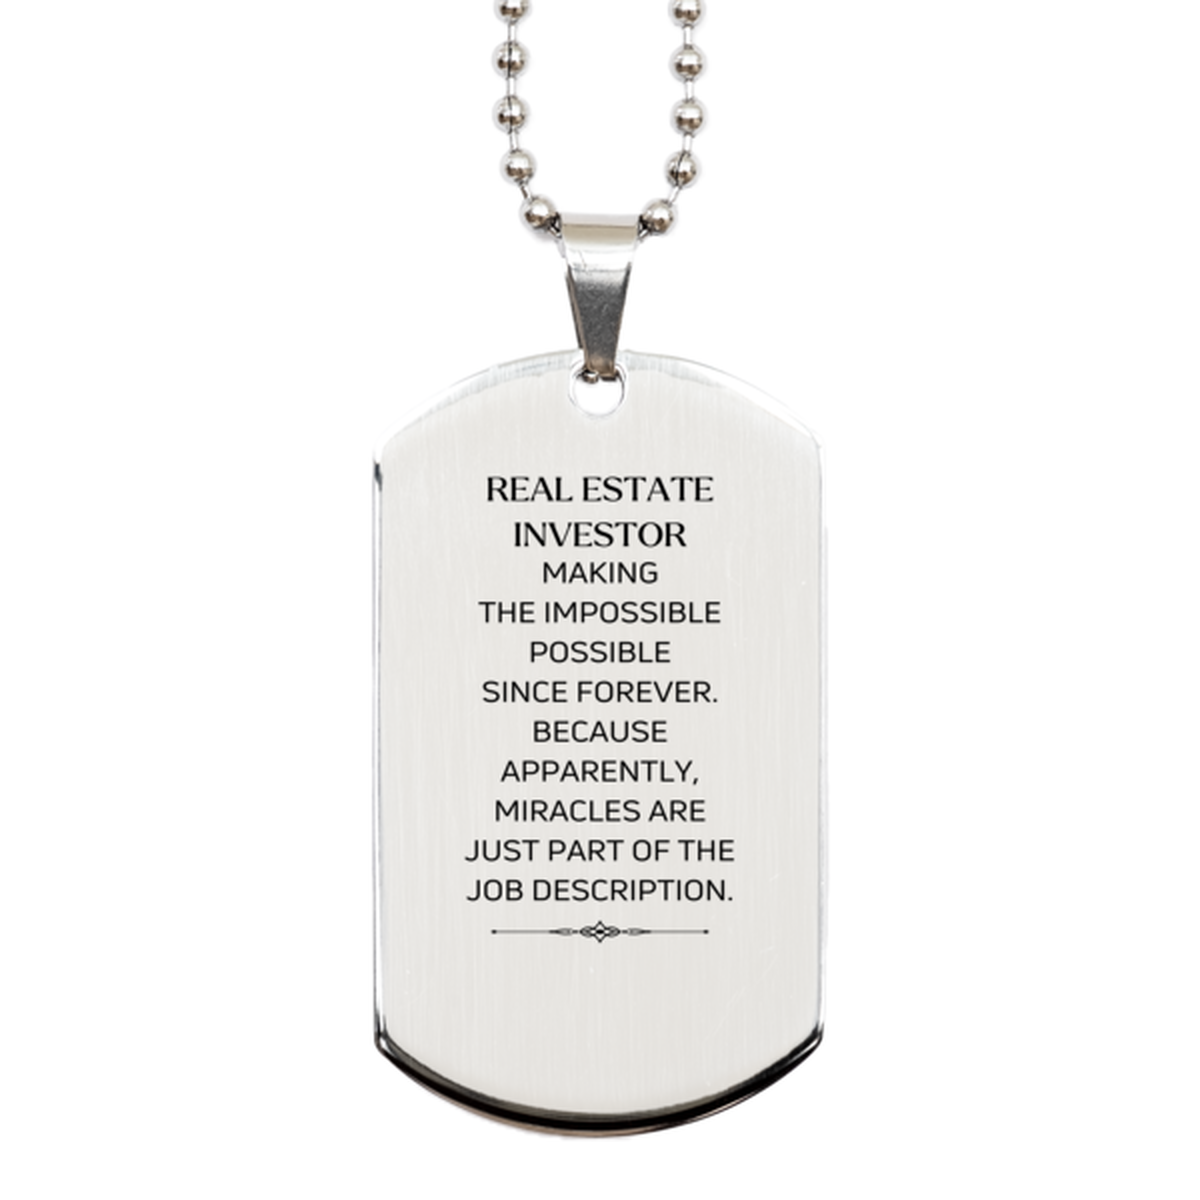 Funny Real Estate Investor Gifts, Miracles are just part of the job description, Inspirational Birthday Silver Dog Tag For Real Estate Investor, Men, Women, Coworkers, Friends, Boss